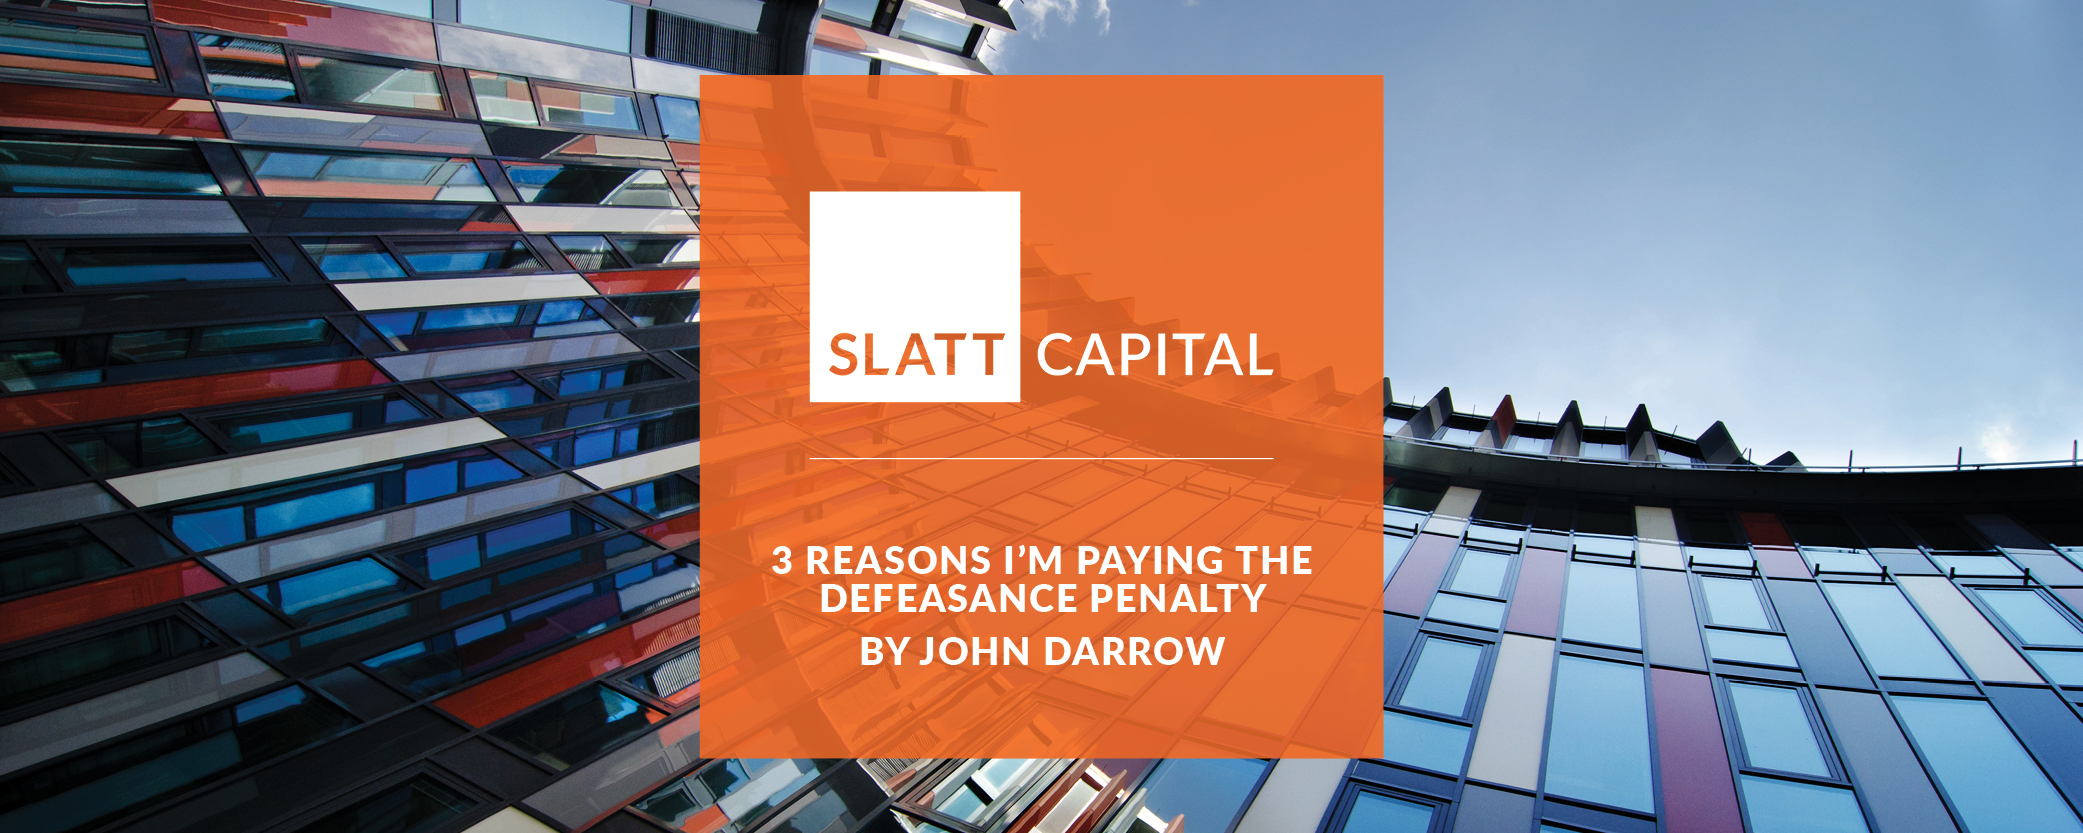 3 reasons i’m paying the defeasance penalty — and other considerations for investors | john darrow